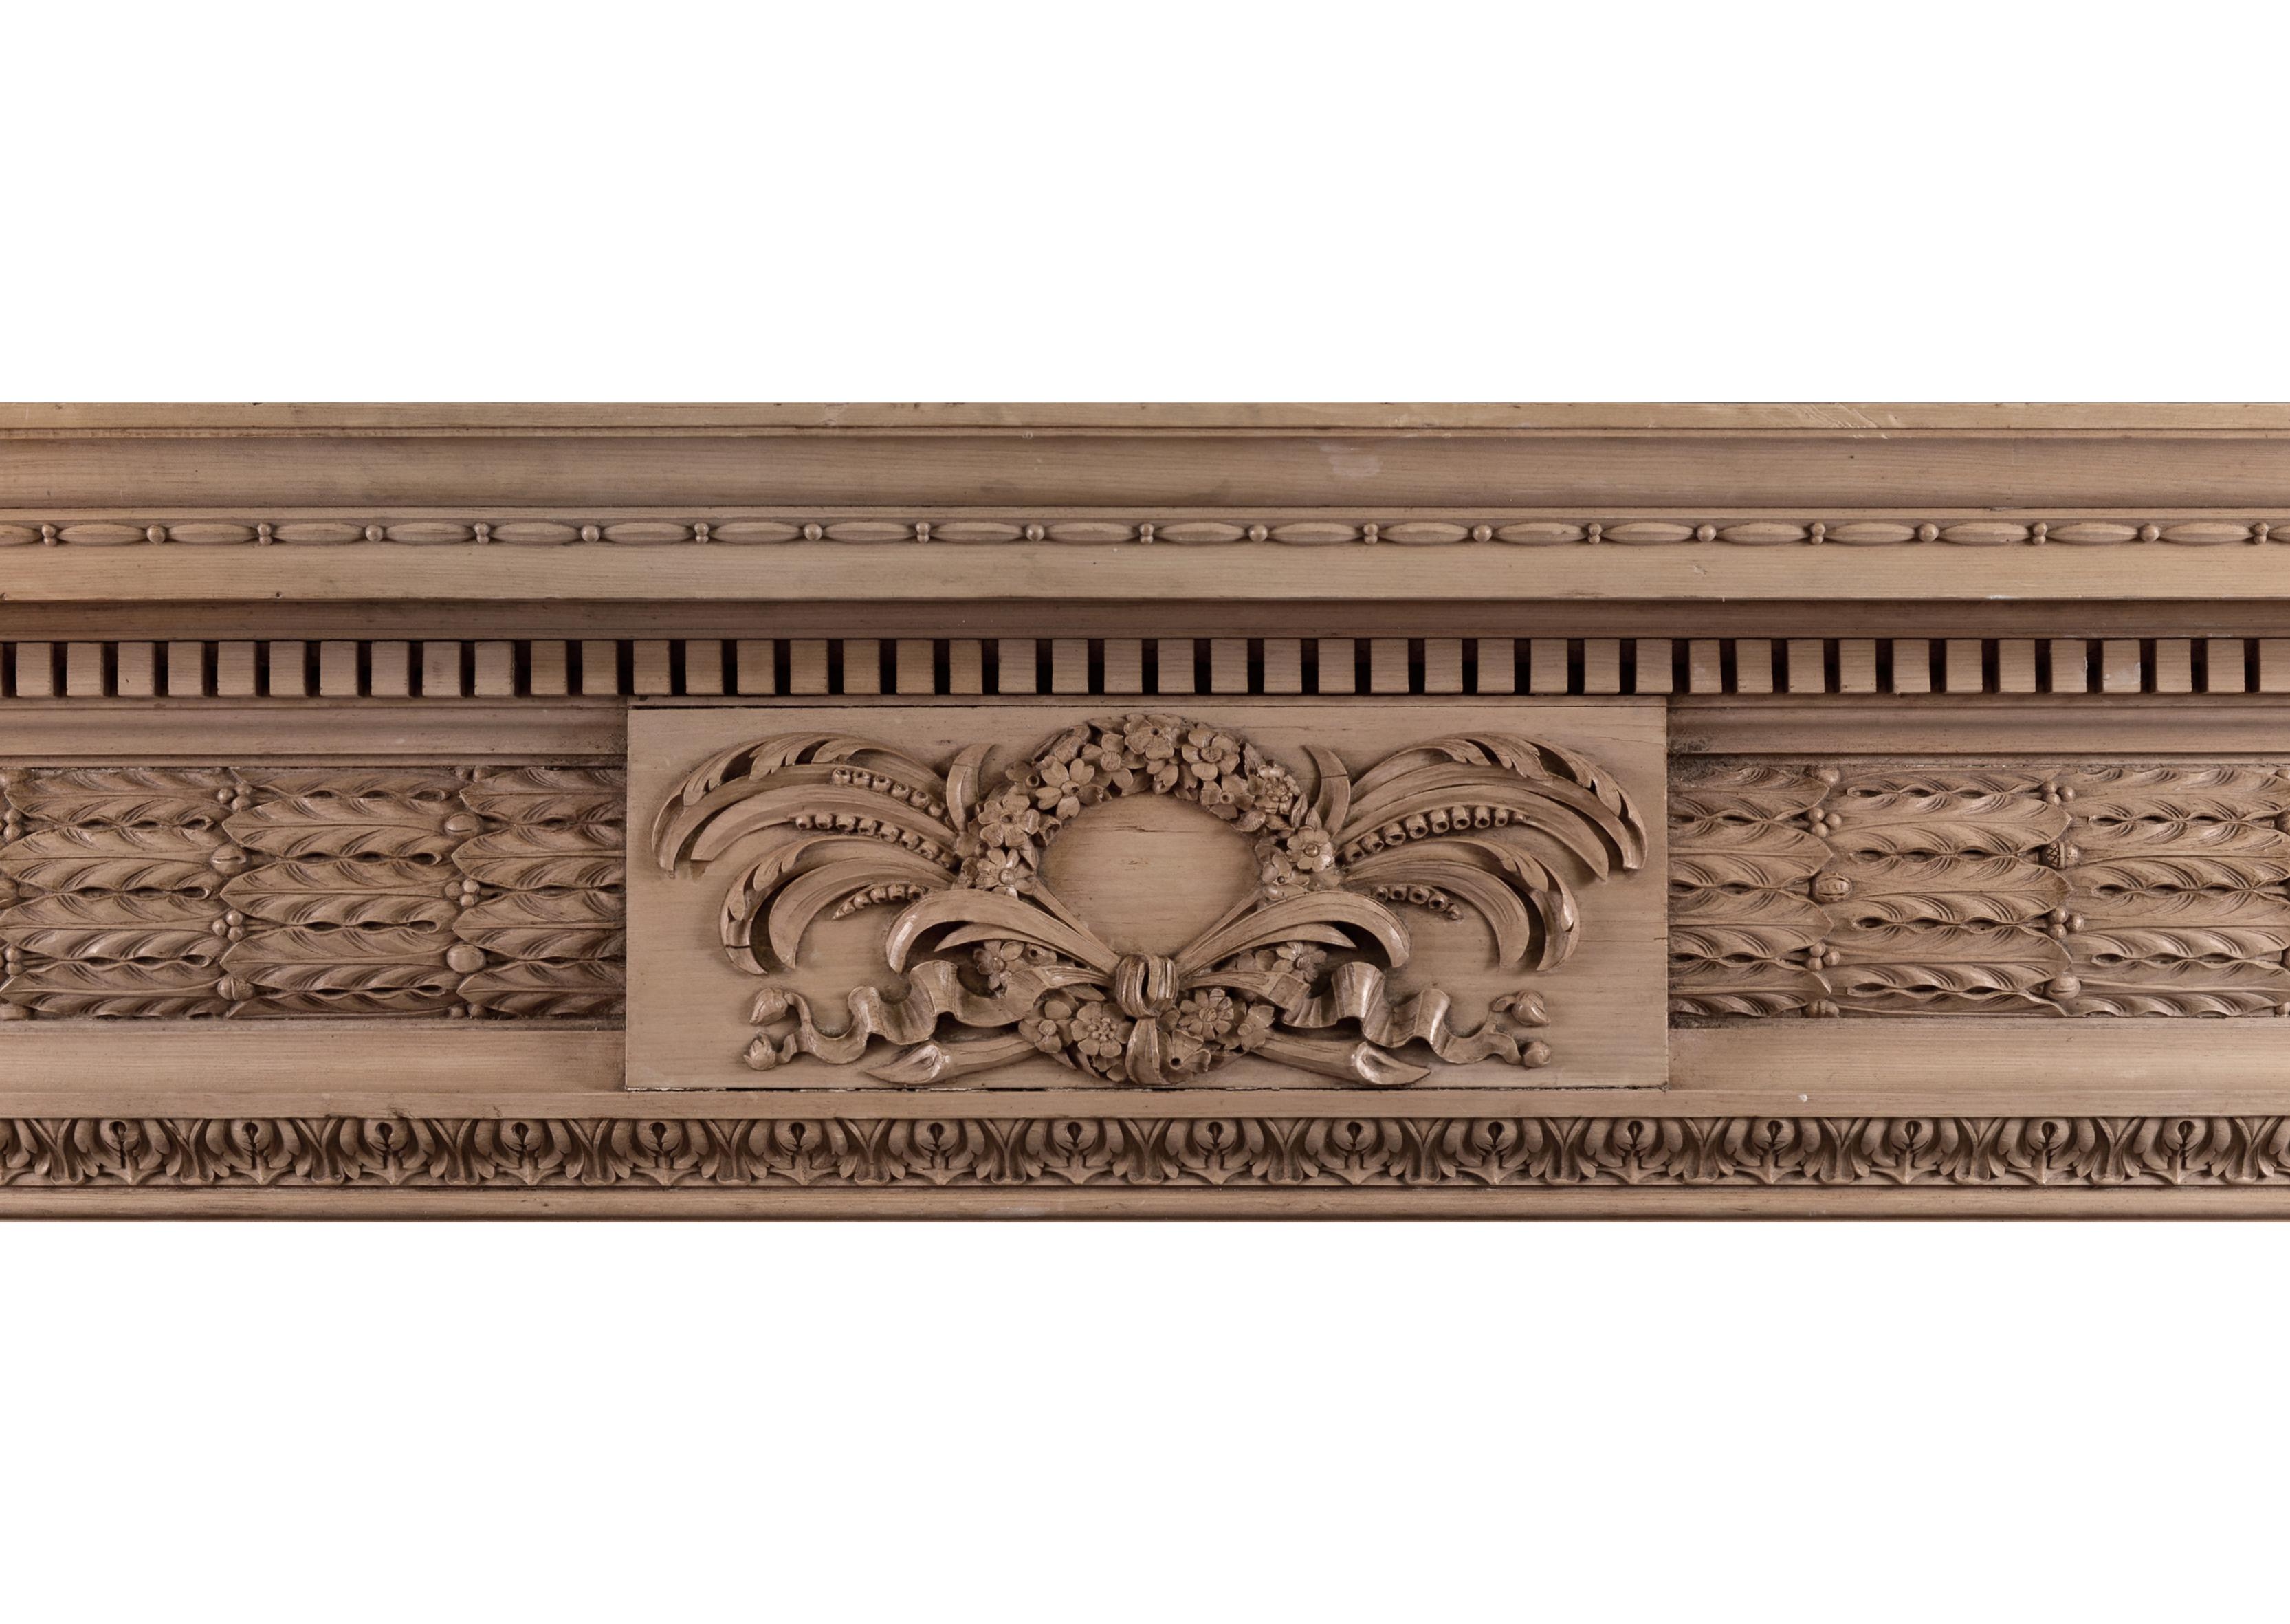 A well carved English pine fireplace. The intricate centre blocking featuring wreath, ribbons and foliage, flanked by barrelled frieze adorned with oak leaves. The jambs with acanthus leaves to inner moulding and carved belldrops. The shelf with